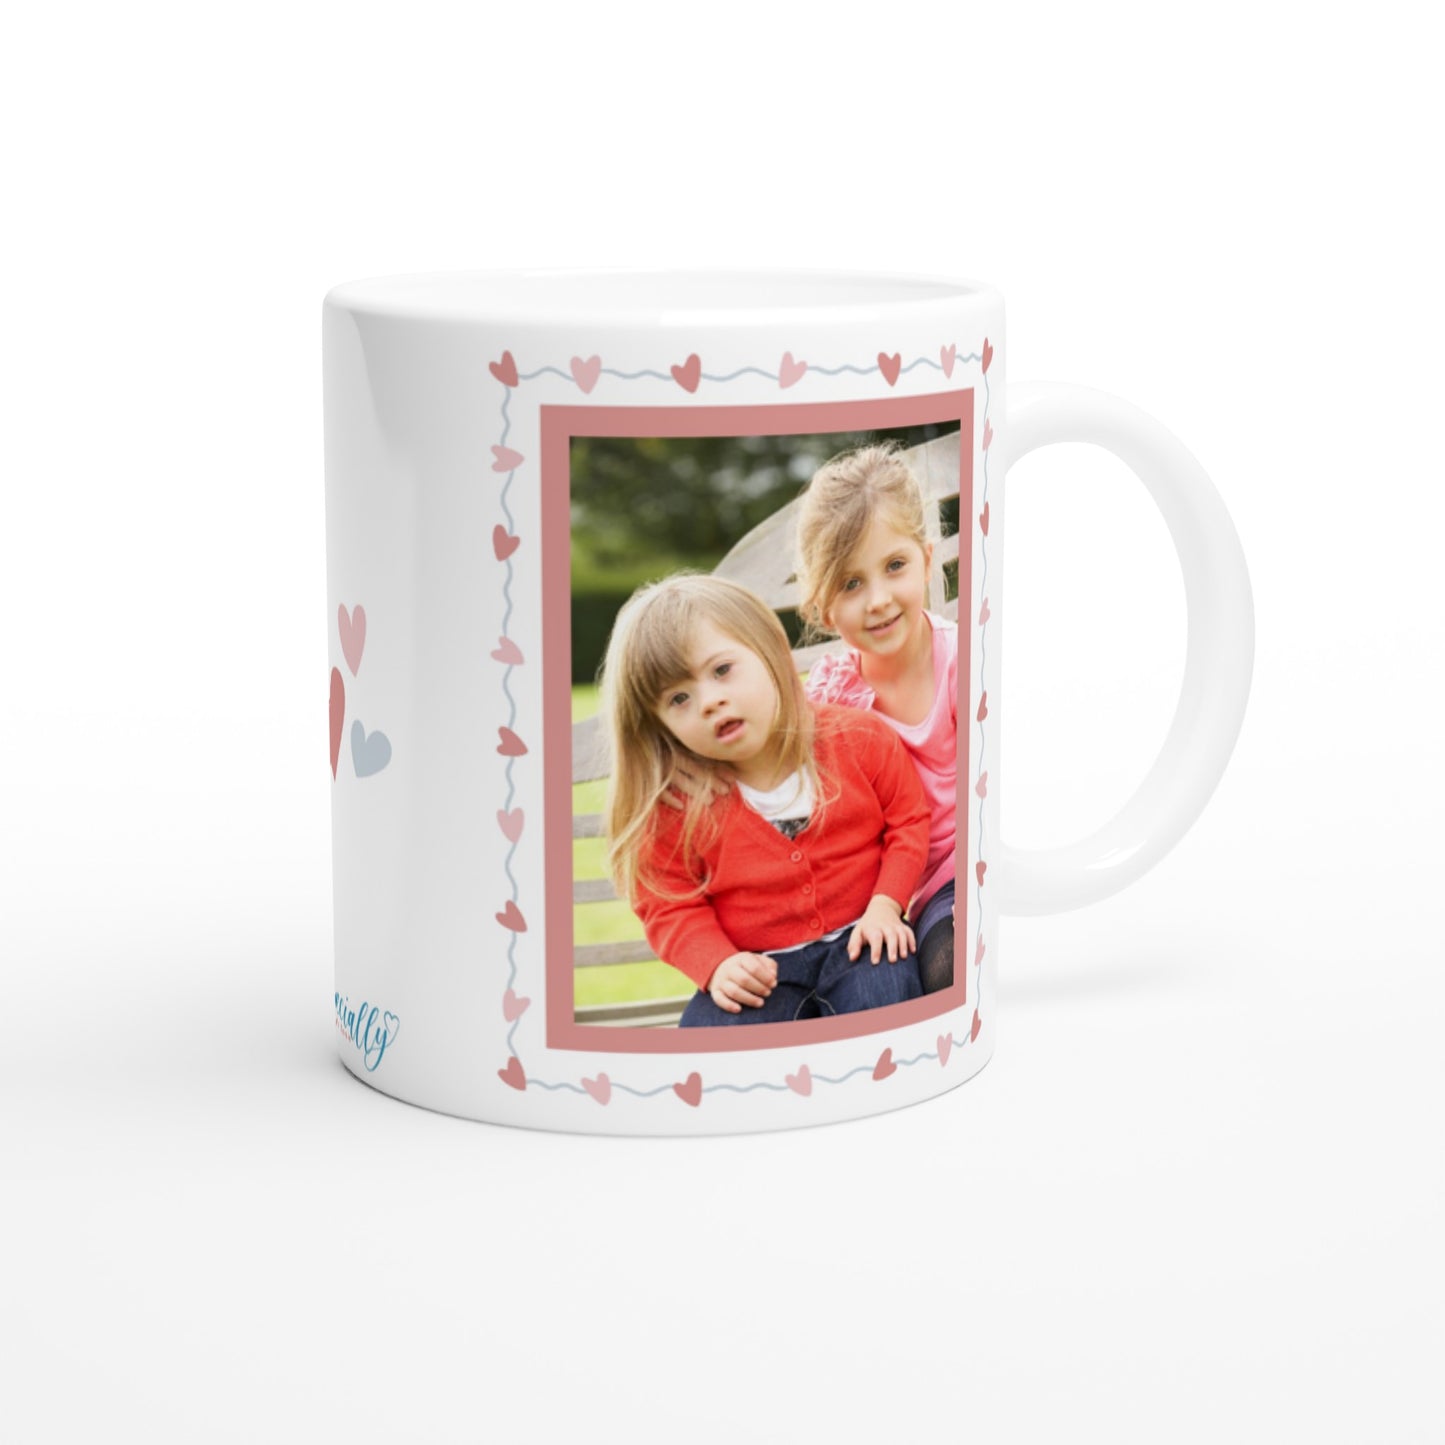 "Grandmothers are a blessing..." Customizable Photo Mug back view